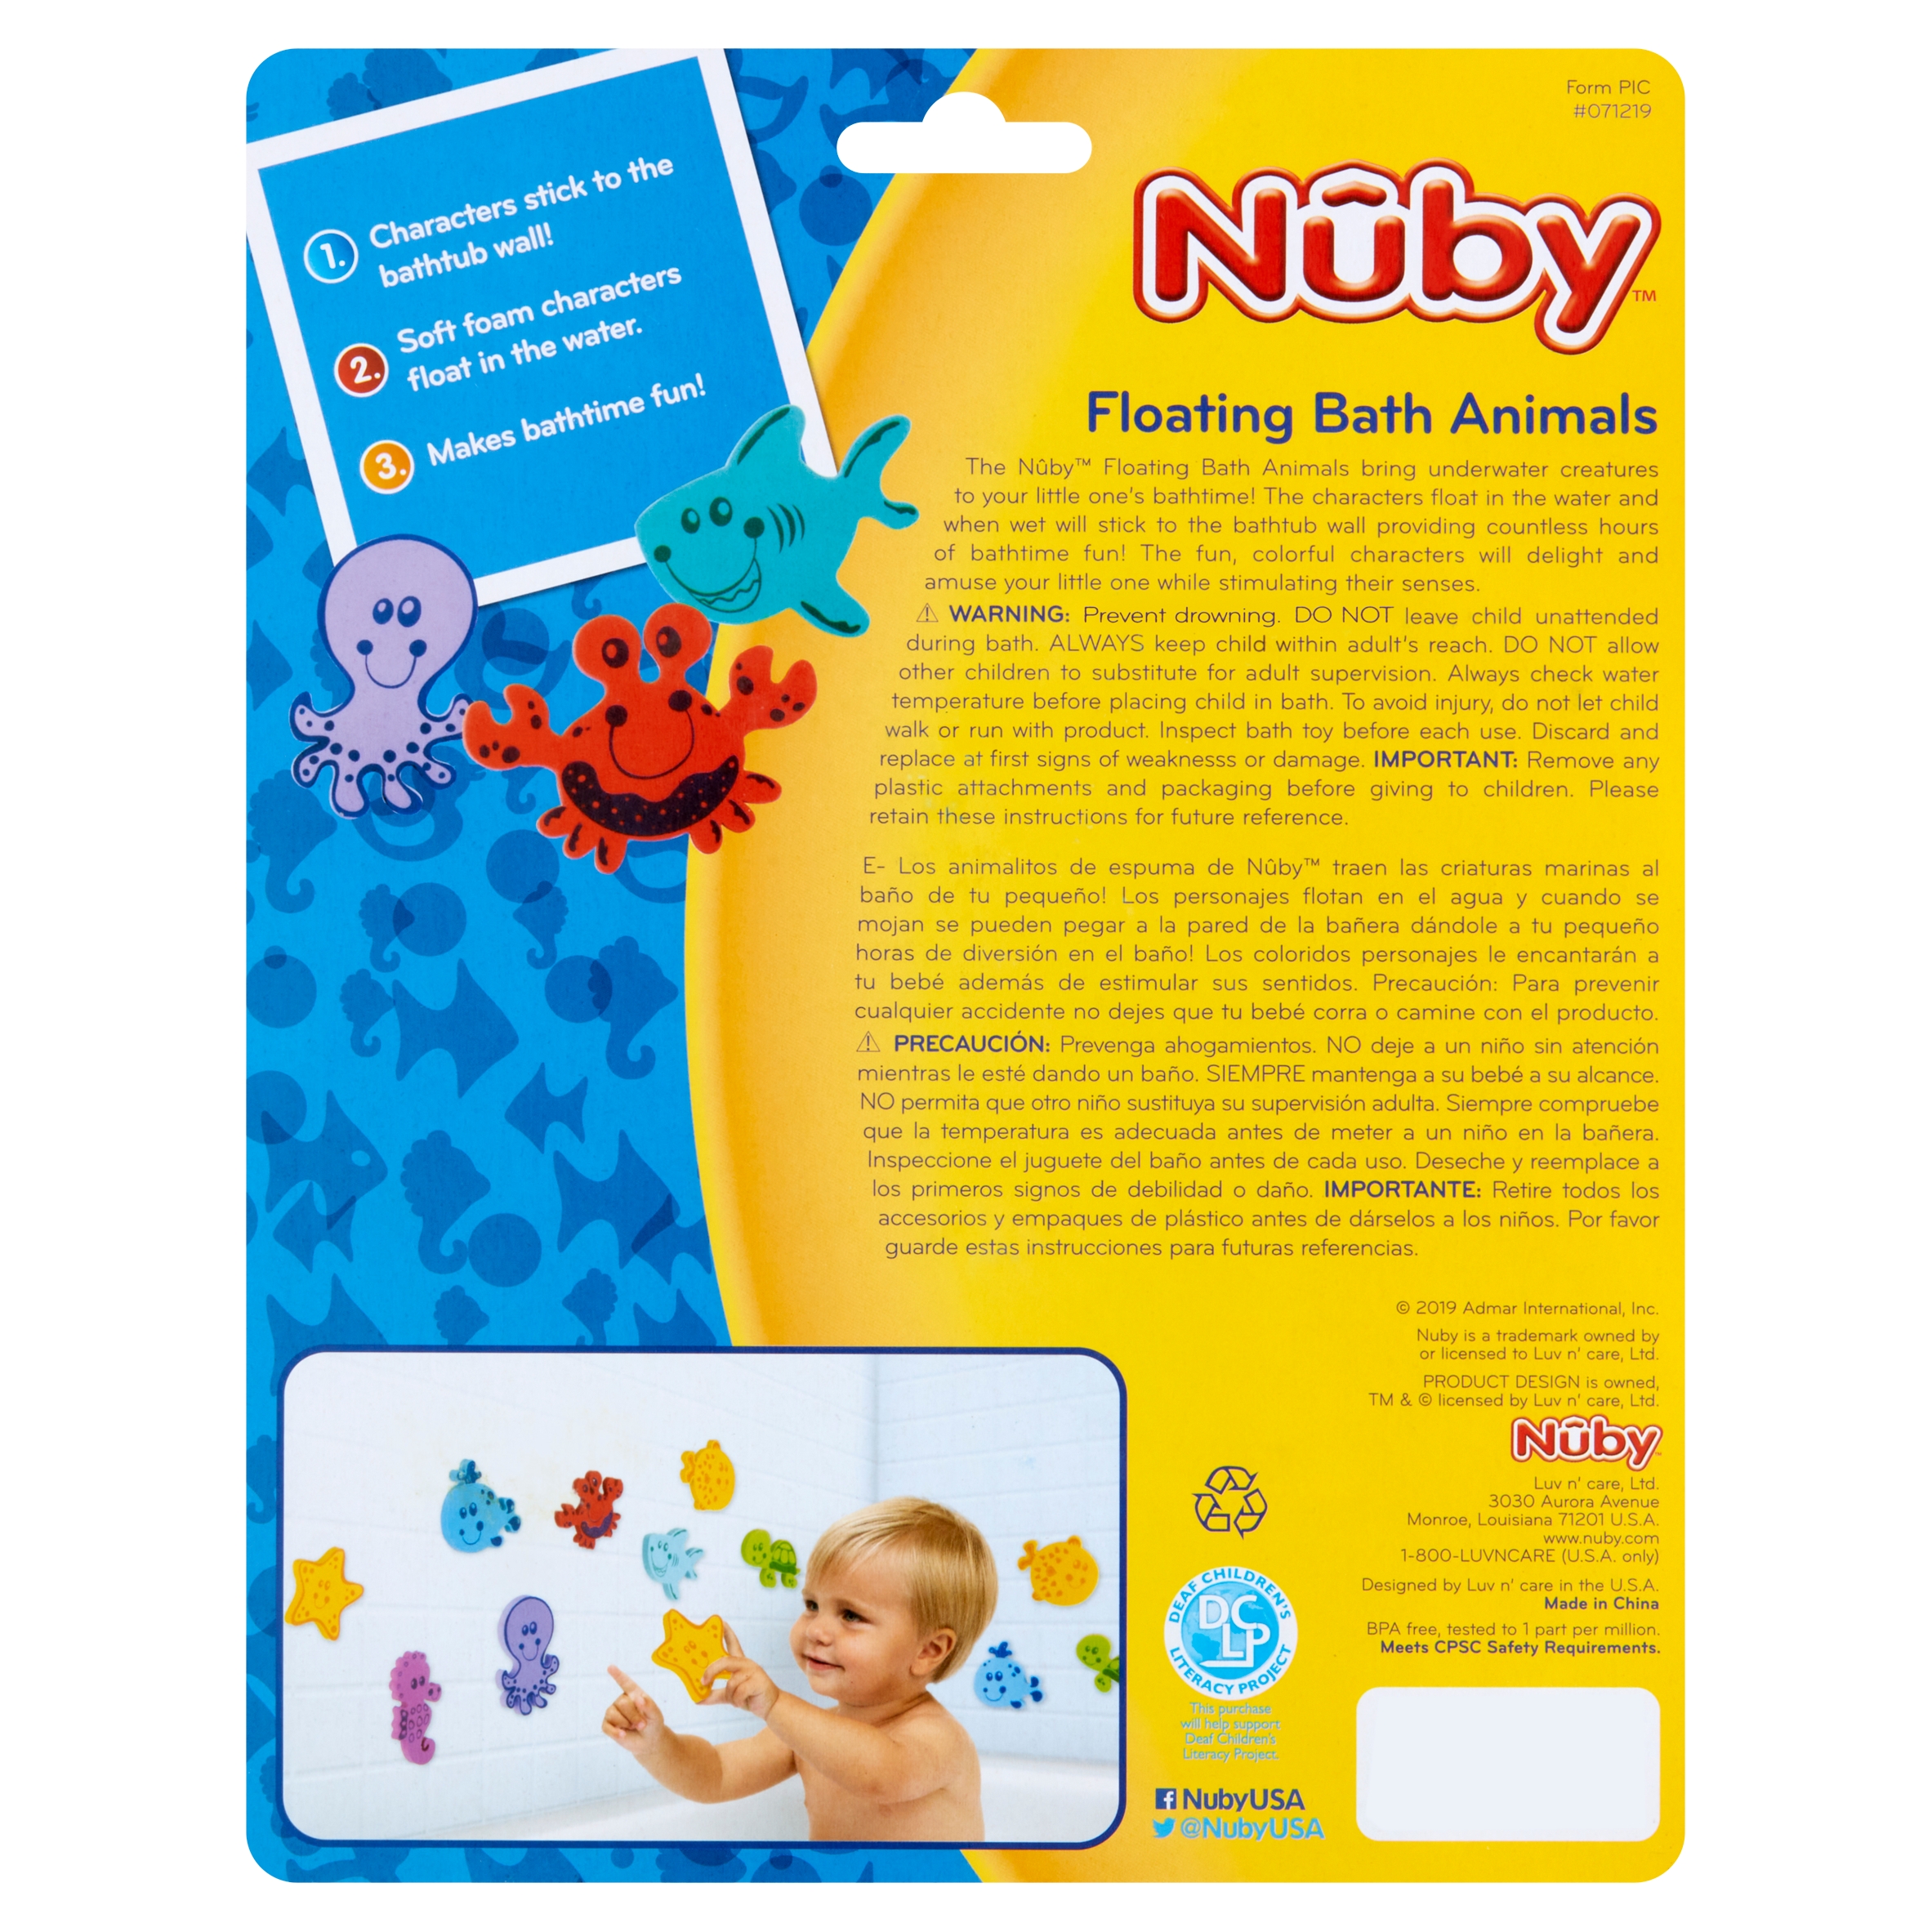 Nûby Floating Bath Animals, 3 years+, 16 count - image 3 of 5